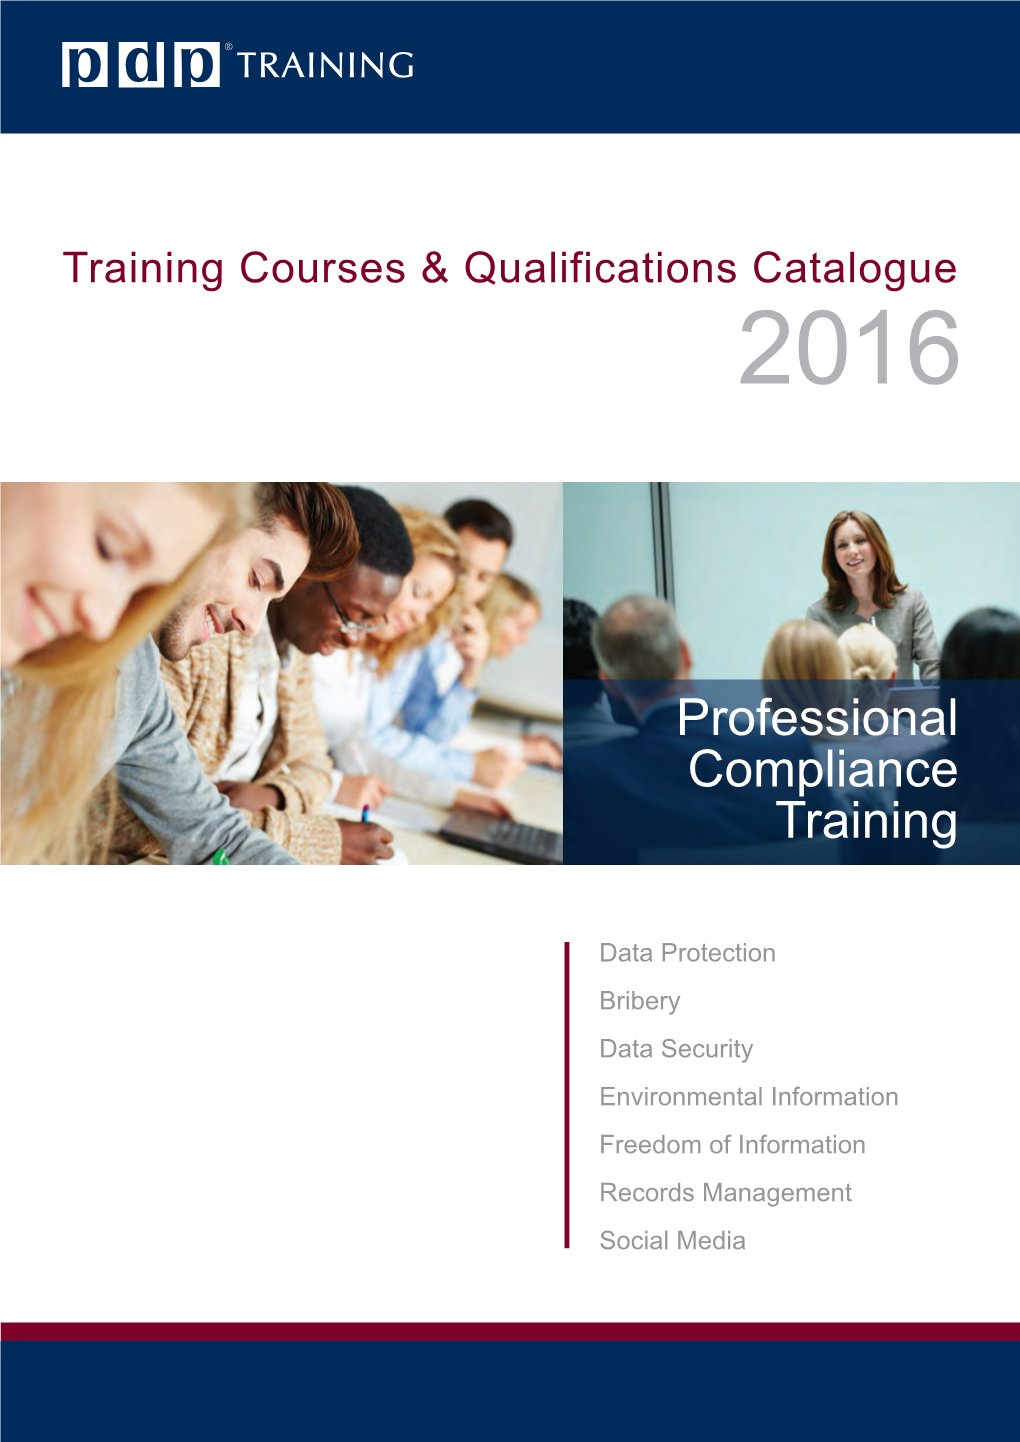 PDP Training Course Catalogue – Professional Compliance Training Courses in UK, Scotland, Wales & Northern Ireland